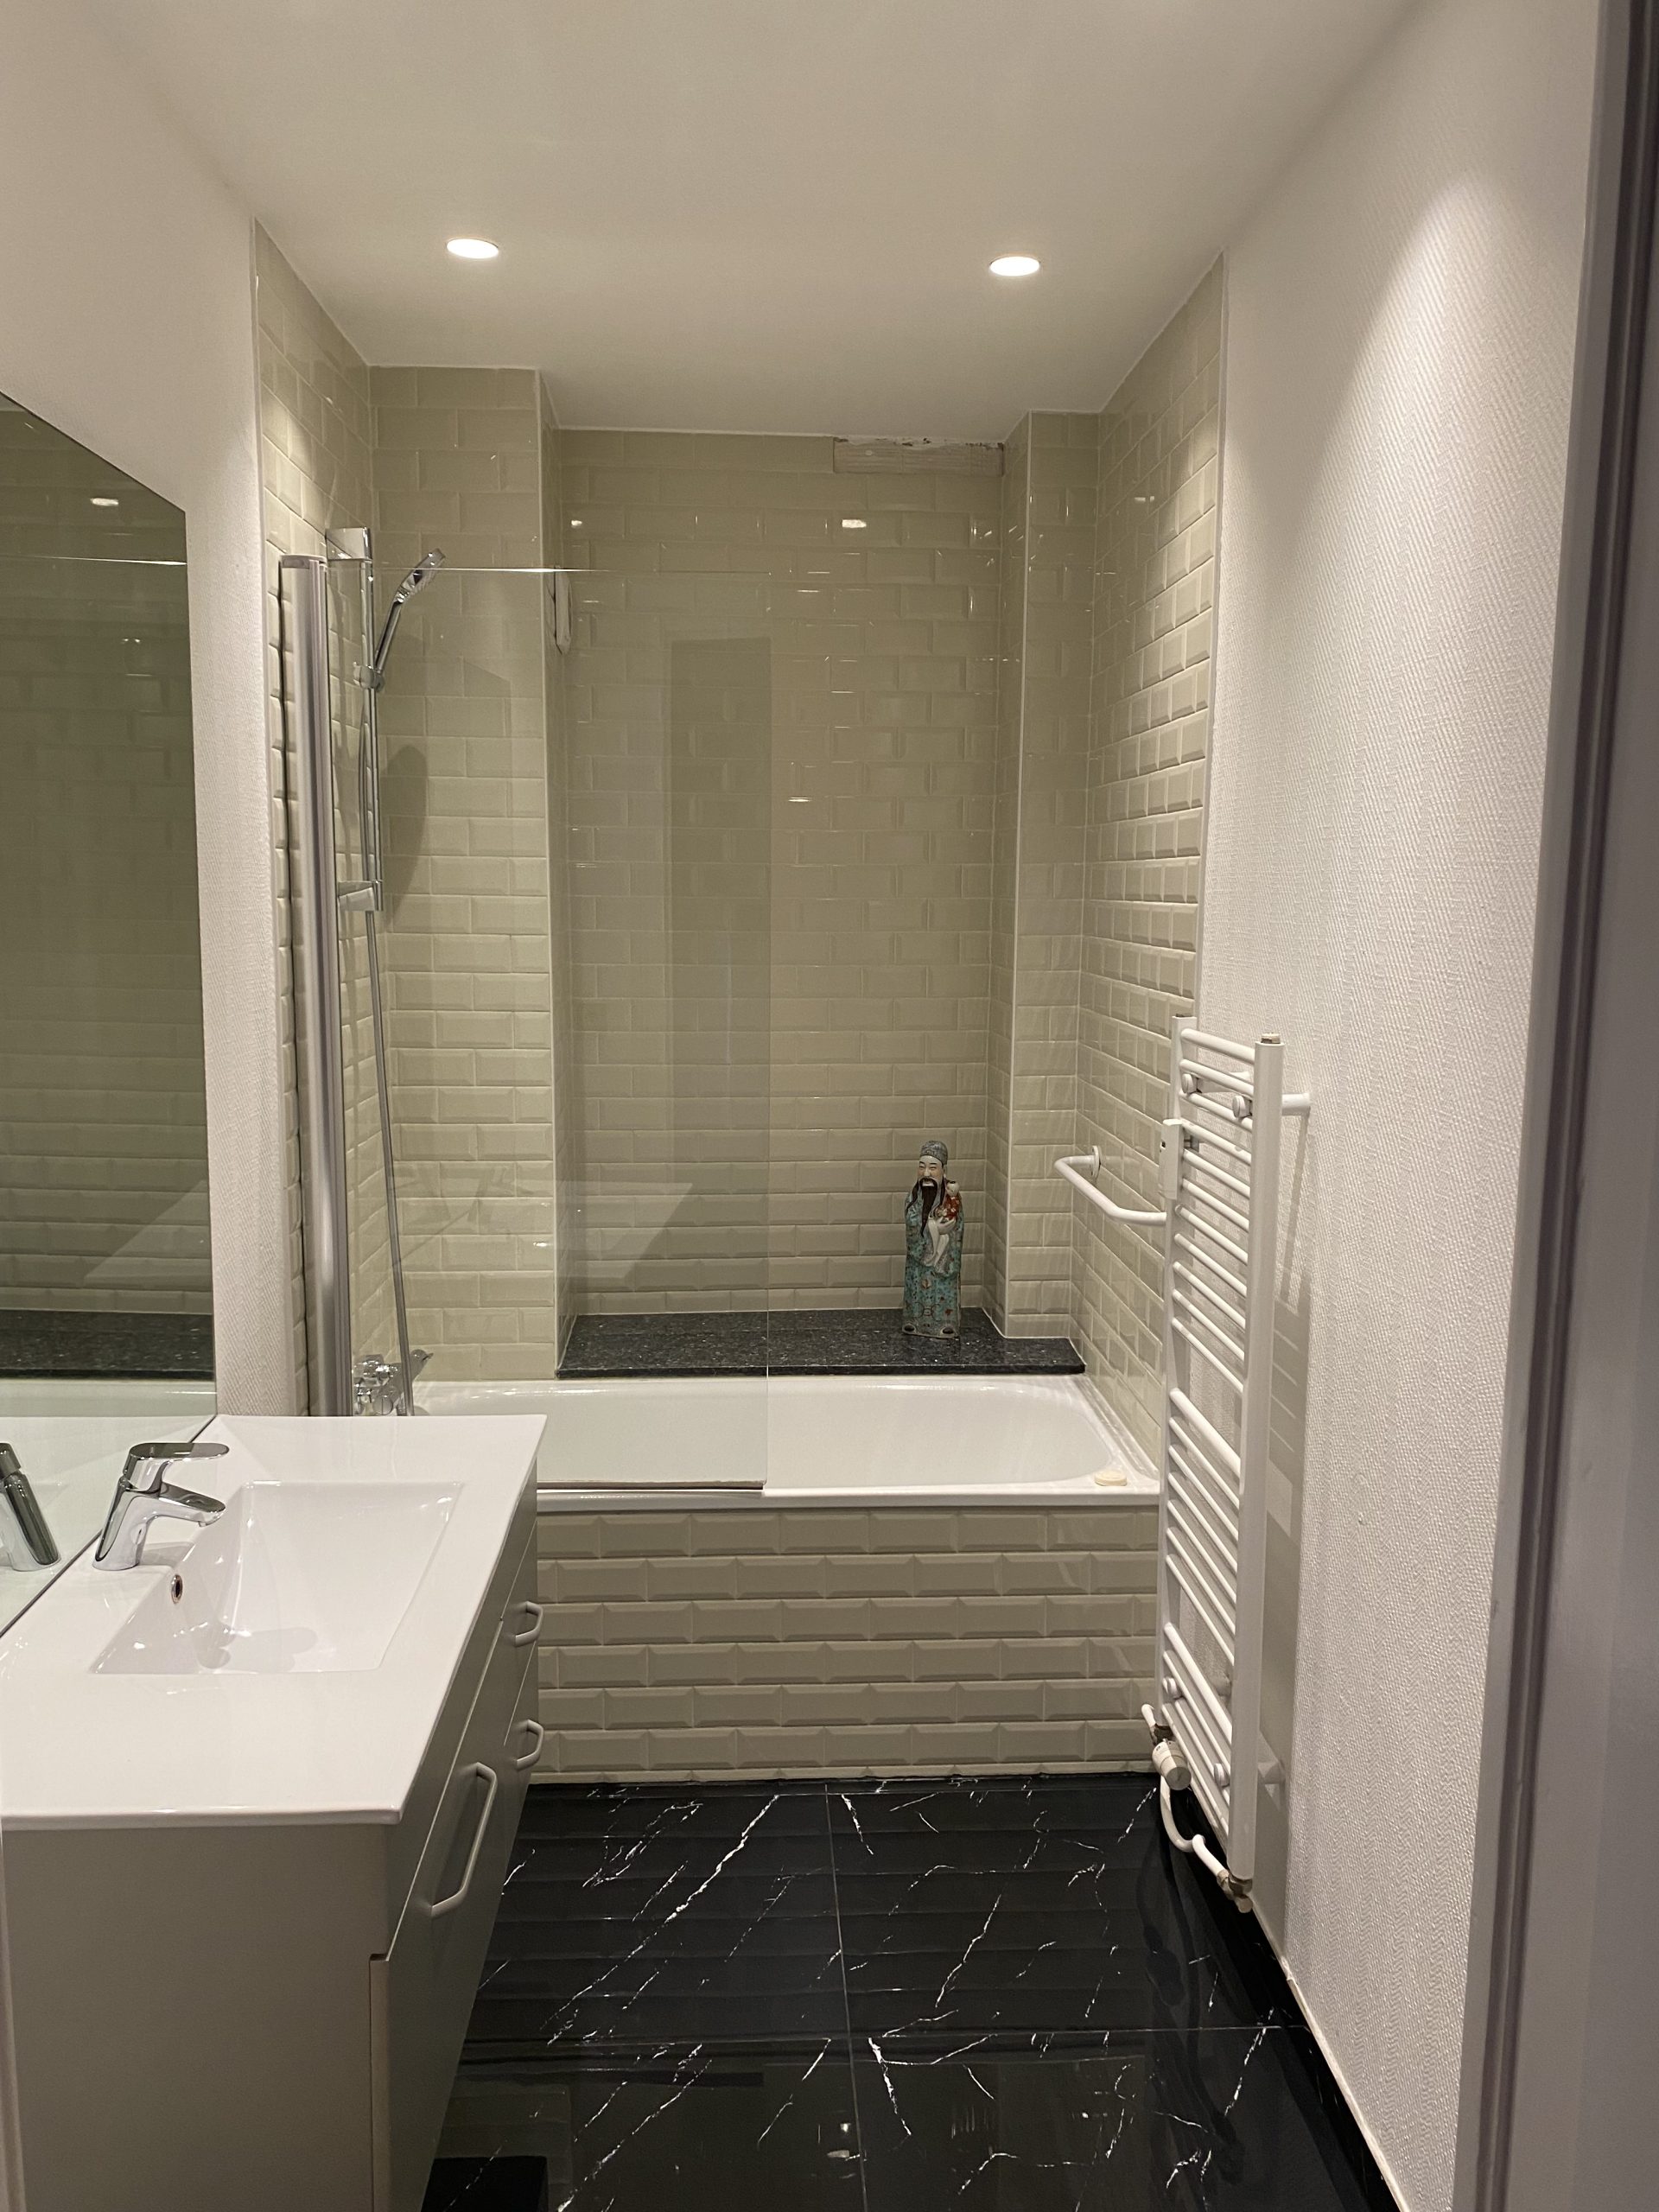 Molière - Exclusive apartment for rent in Brussels - bathroom